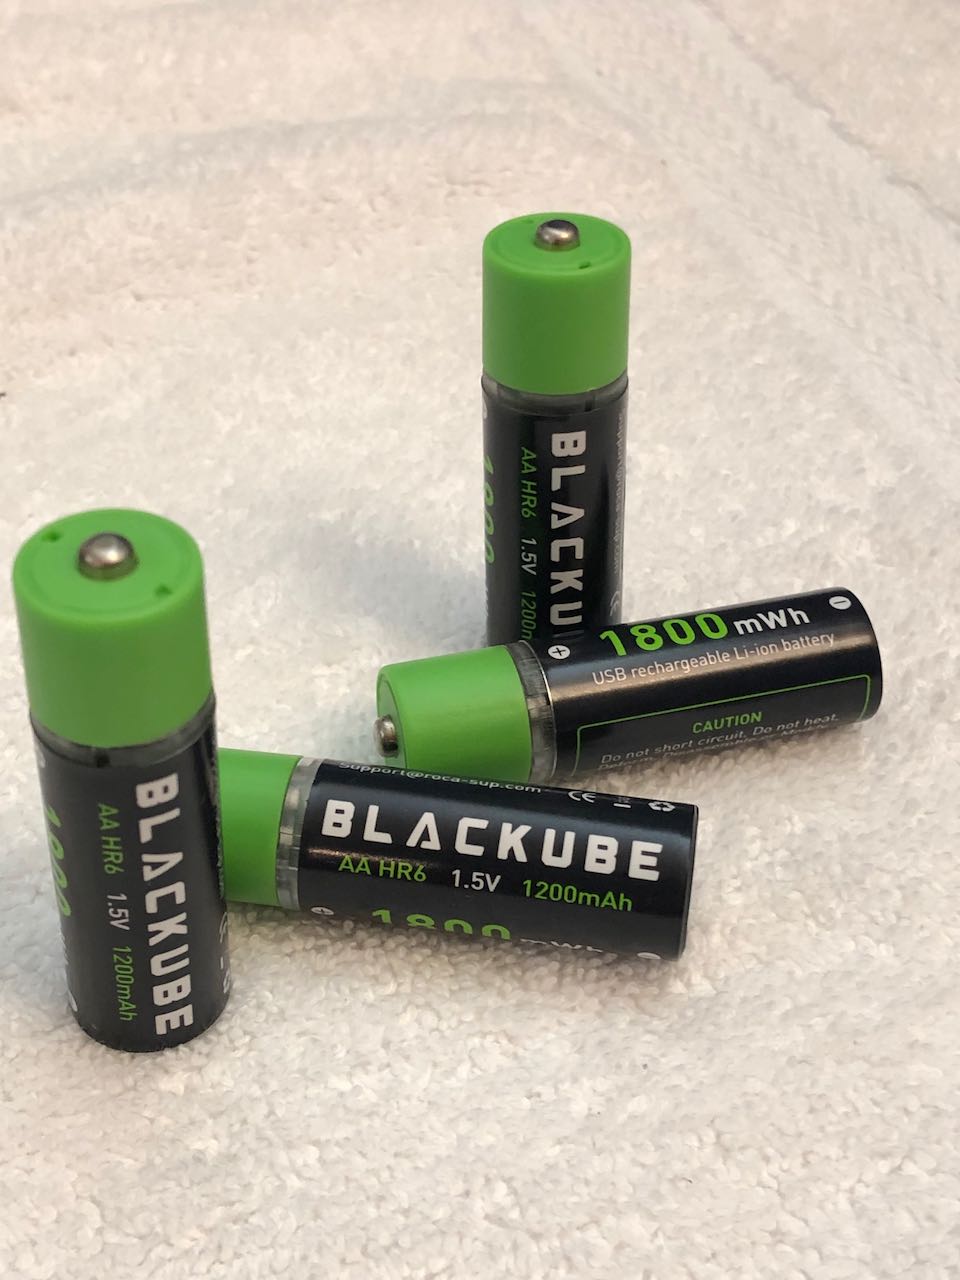 AA lithium ion batteries